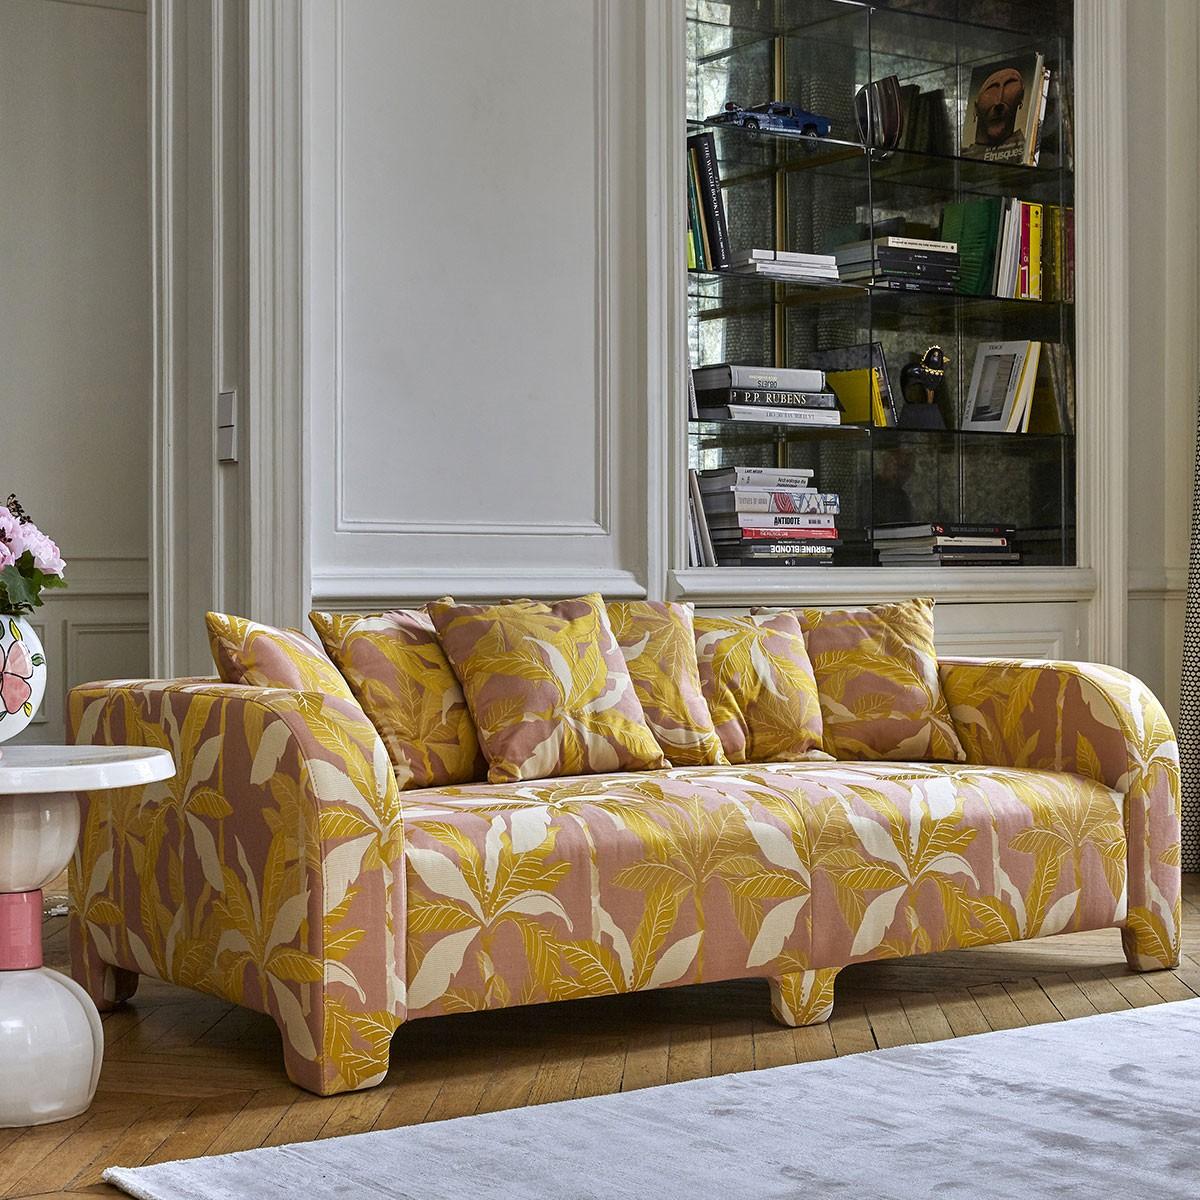 Popus Editions Graziella 3-seater sofa in pink Verone velvet upholstery

A foot that hides another. A cushion that hides another. A curve that hides another with contemporary lines and a base like a punctuation mark, this sofa gives pride of place